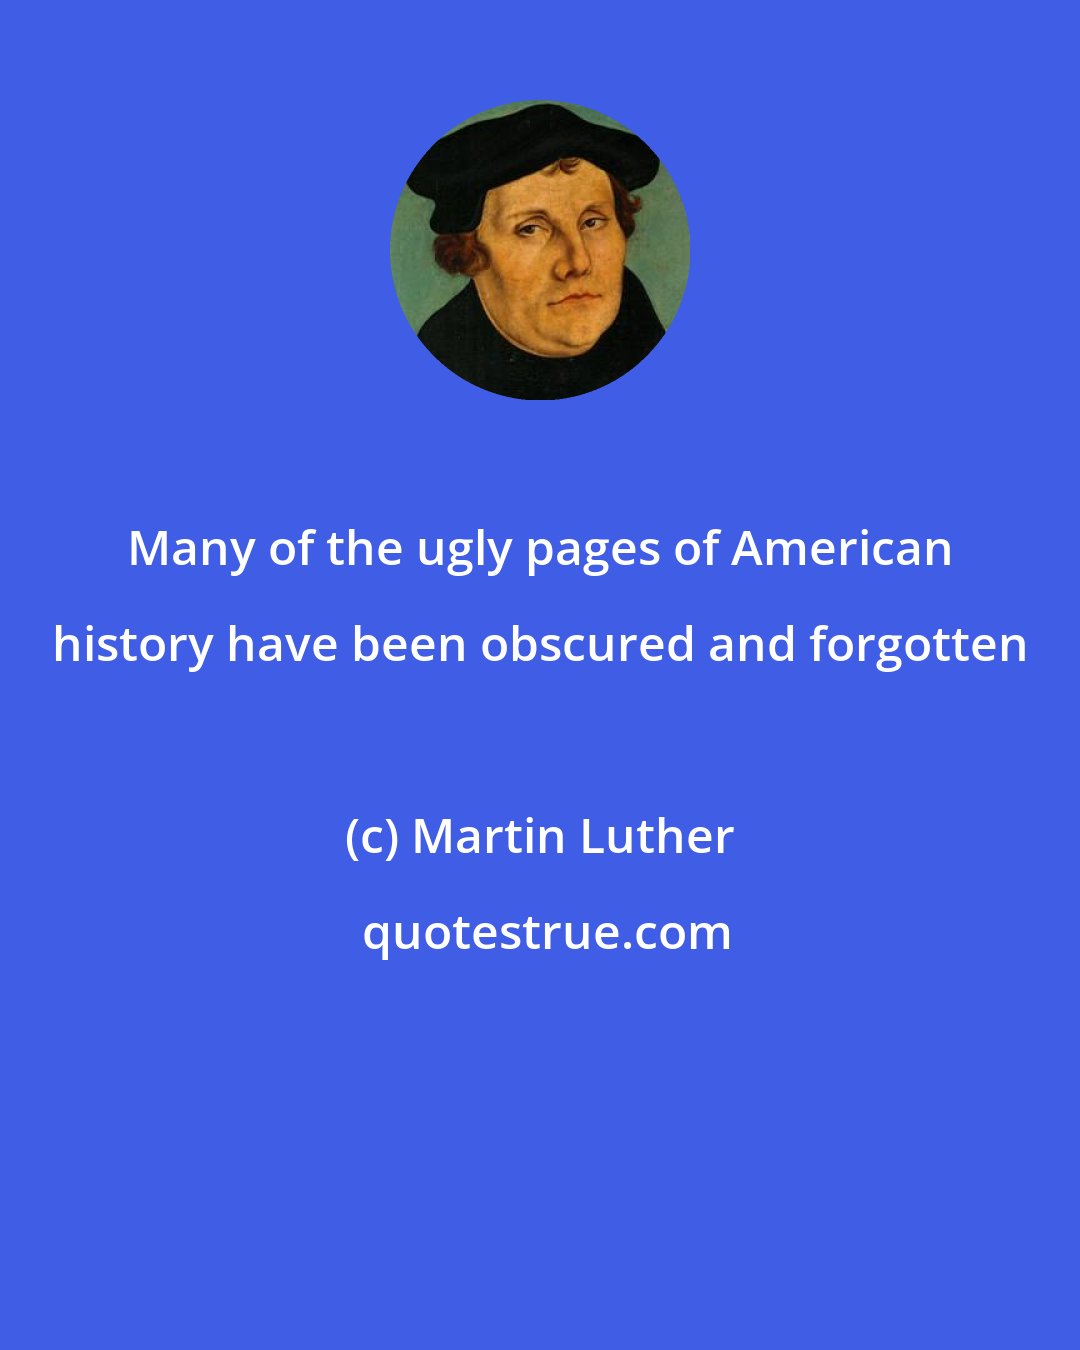 Martin Luther: Many of the ugly pages of American history have been obscured and forgotten